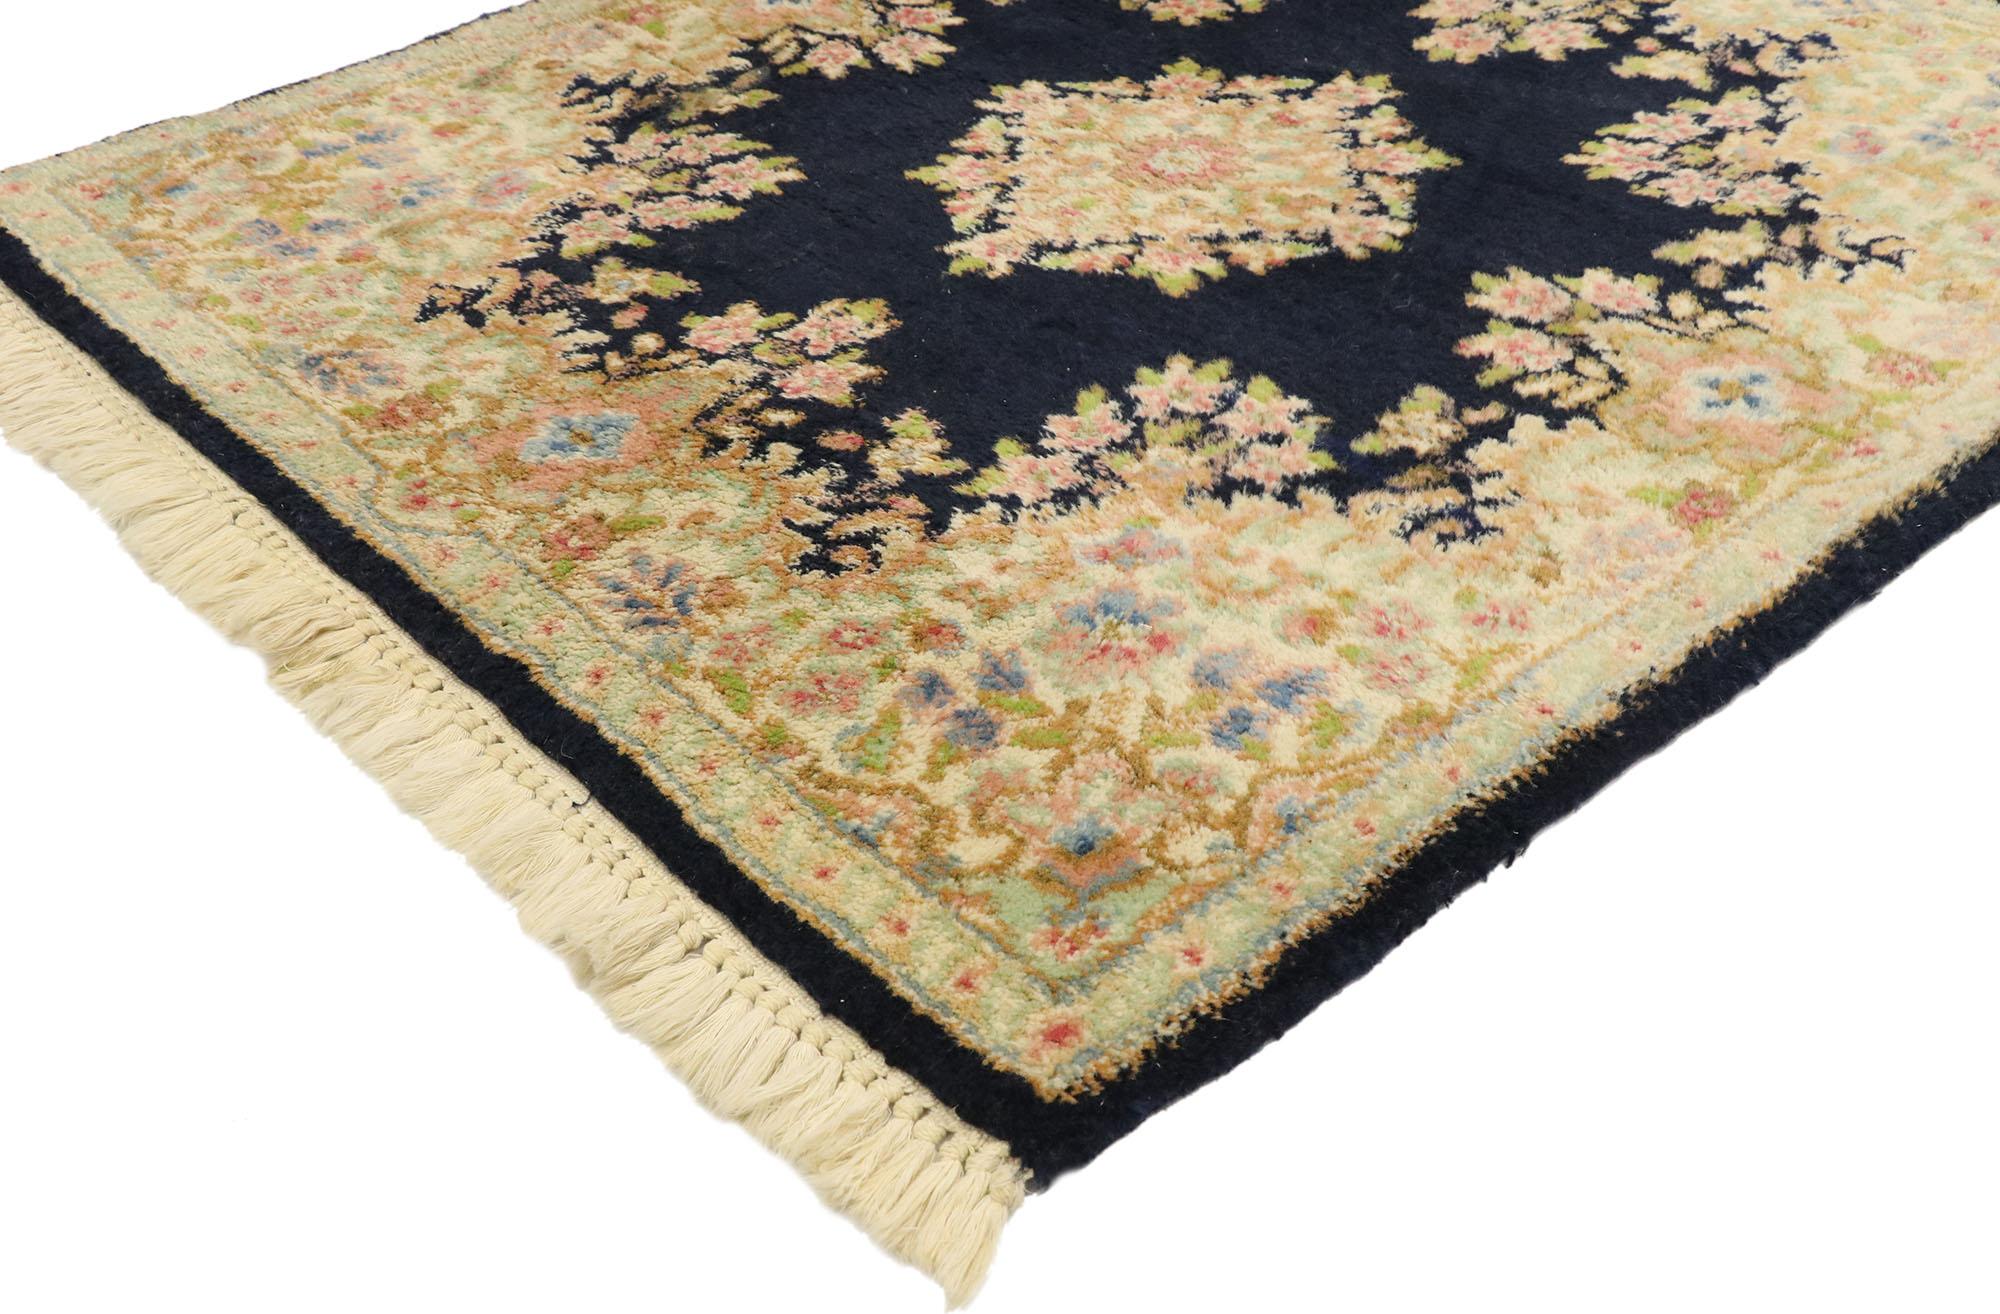 77462, antique Persian Kerman rug with Baroque style, small accent rug. Sure to captivate the most discerning aesthete, this hand knotted wool antique Persian Kerman rug is the epitome of tradition and luxe Baroque style in one. A stunning testament